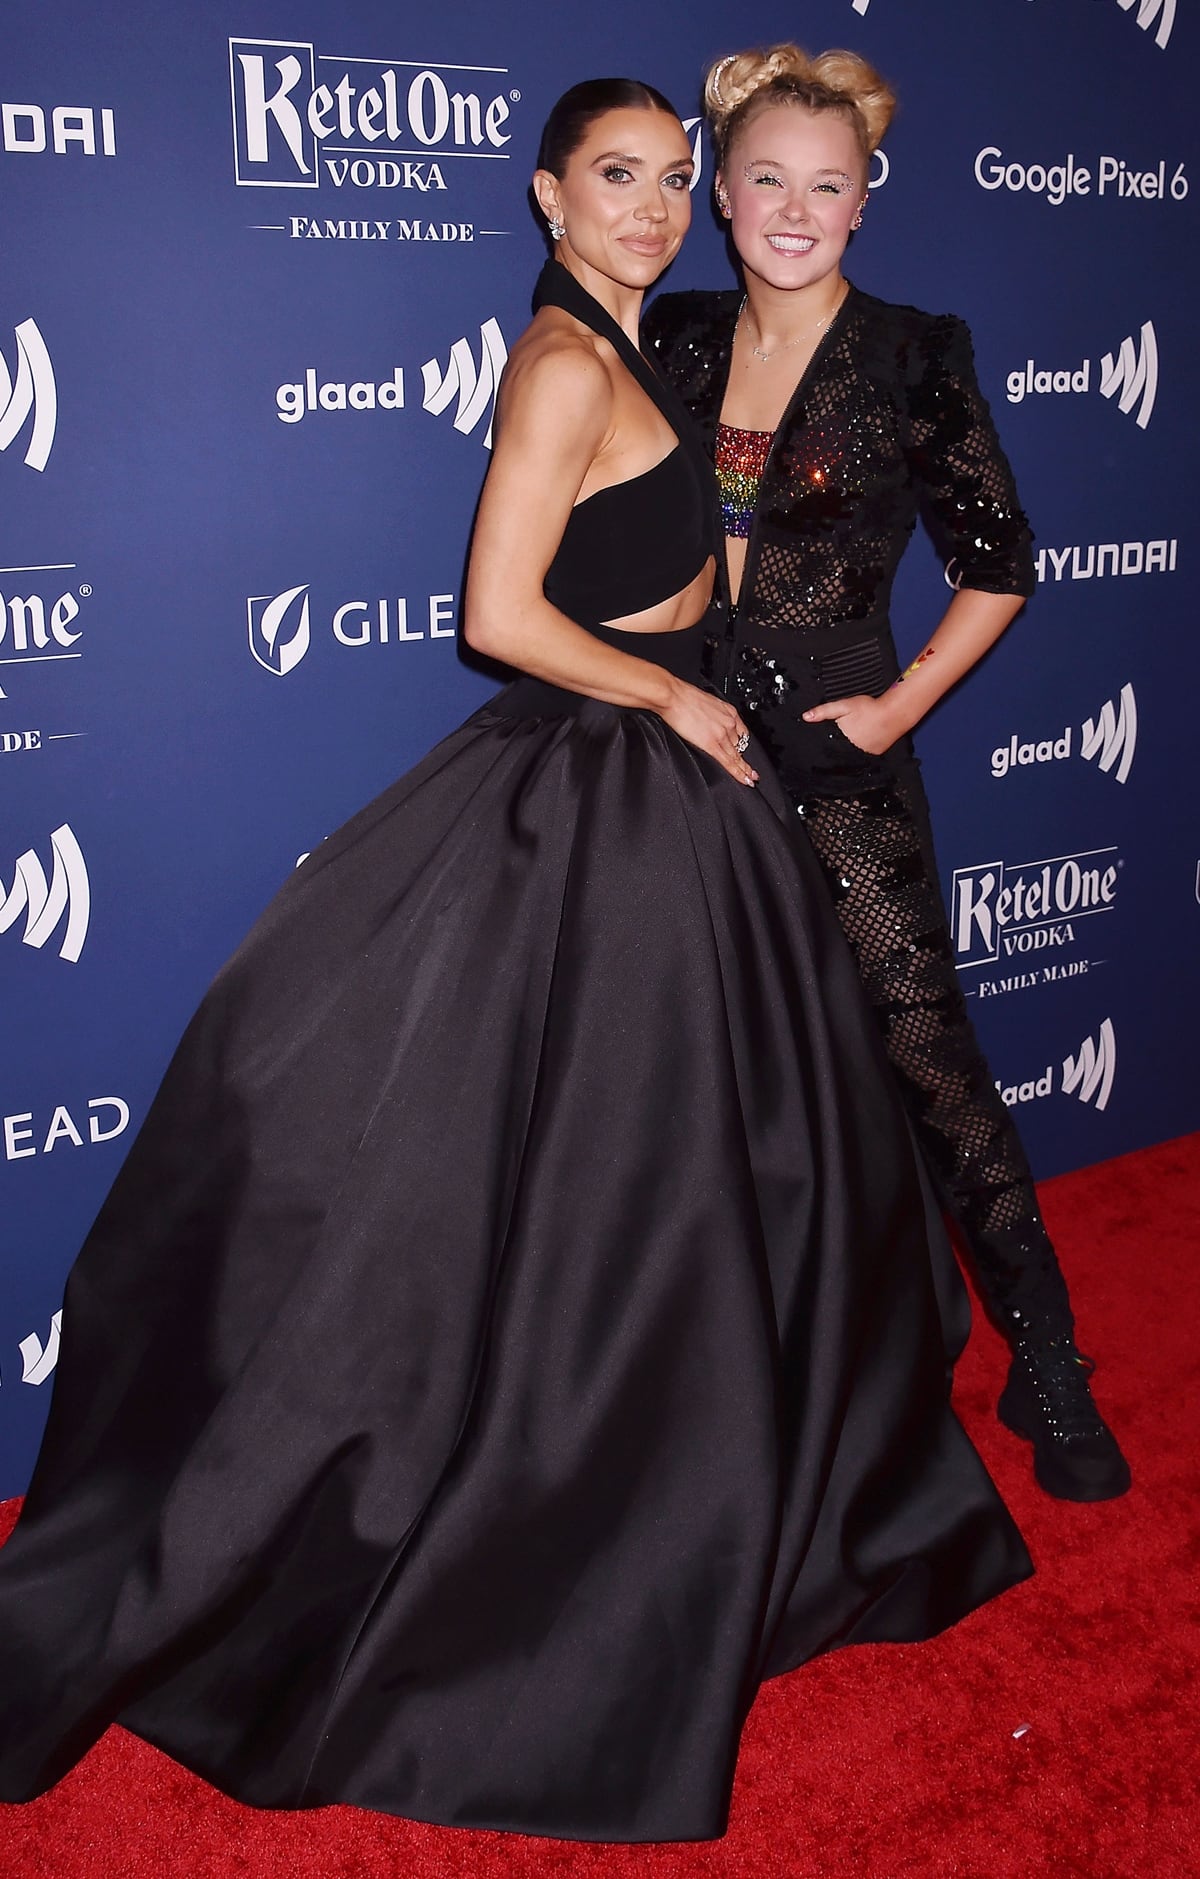 JoJo Siwa attended the 2022 GLAAD Awards with her good friend and Dancing With the Stars partner Jenna Johnson